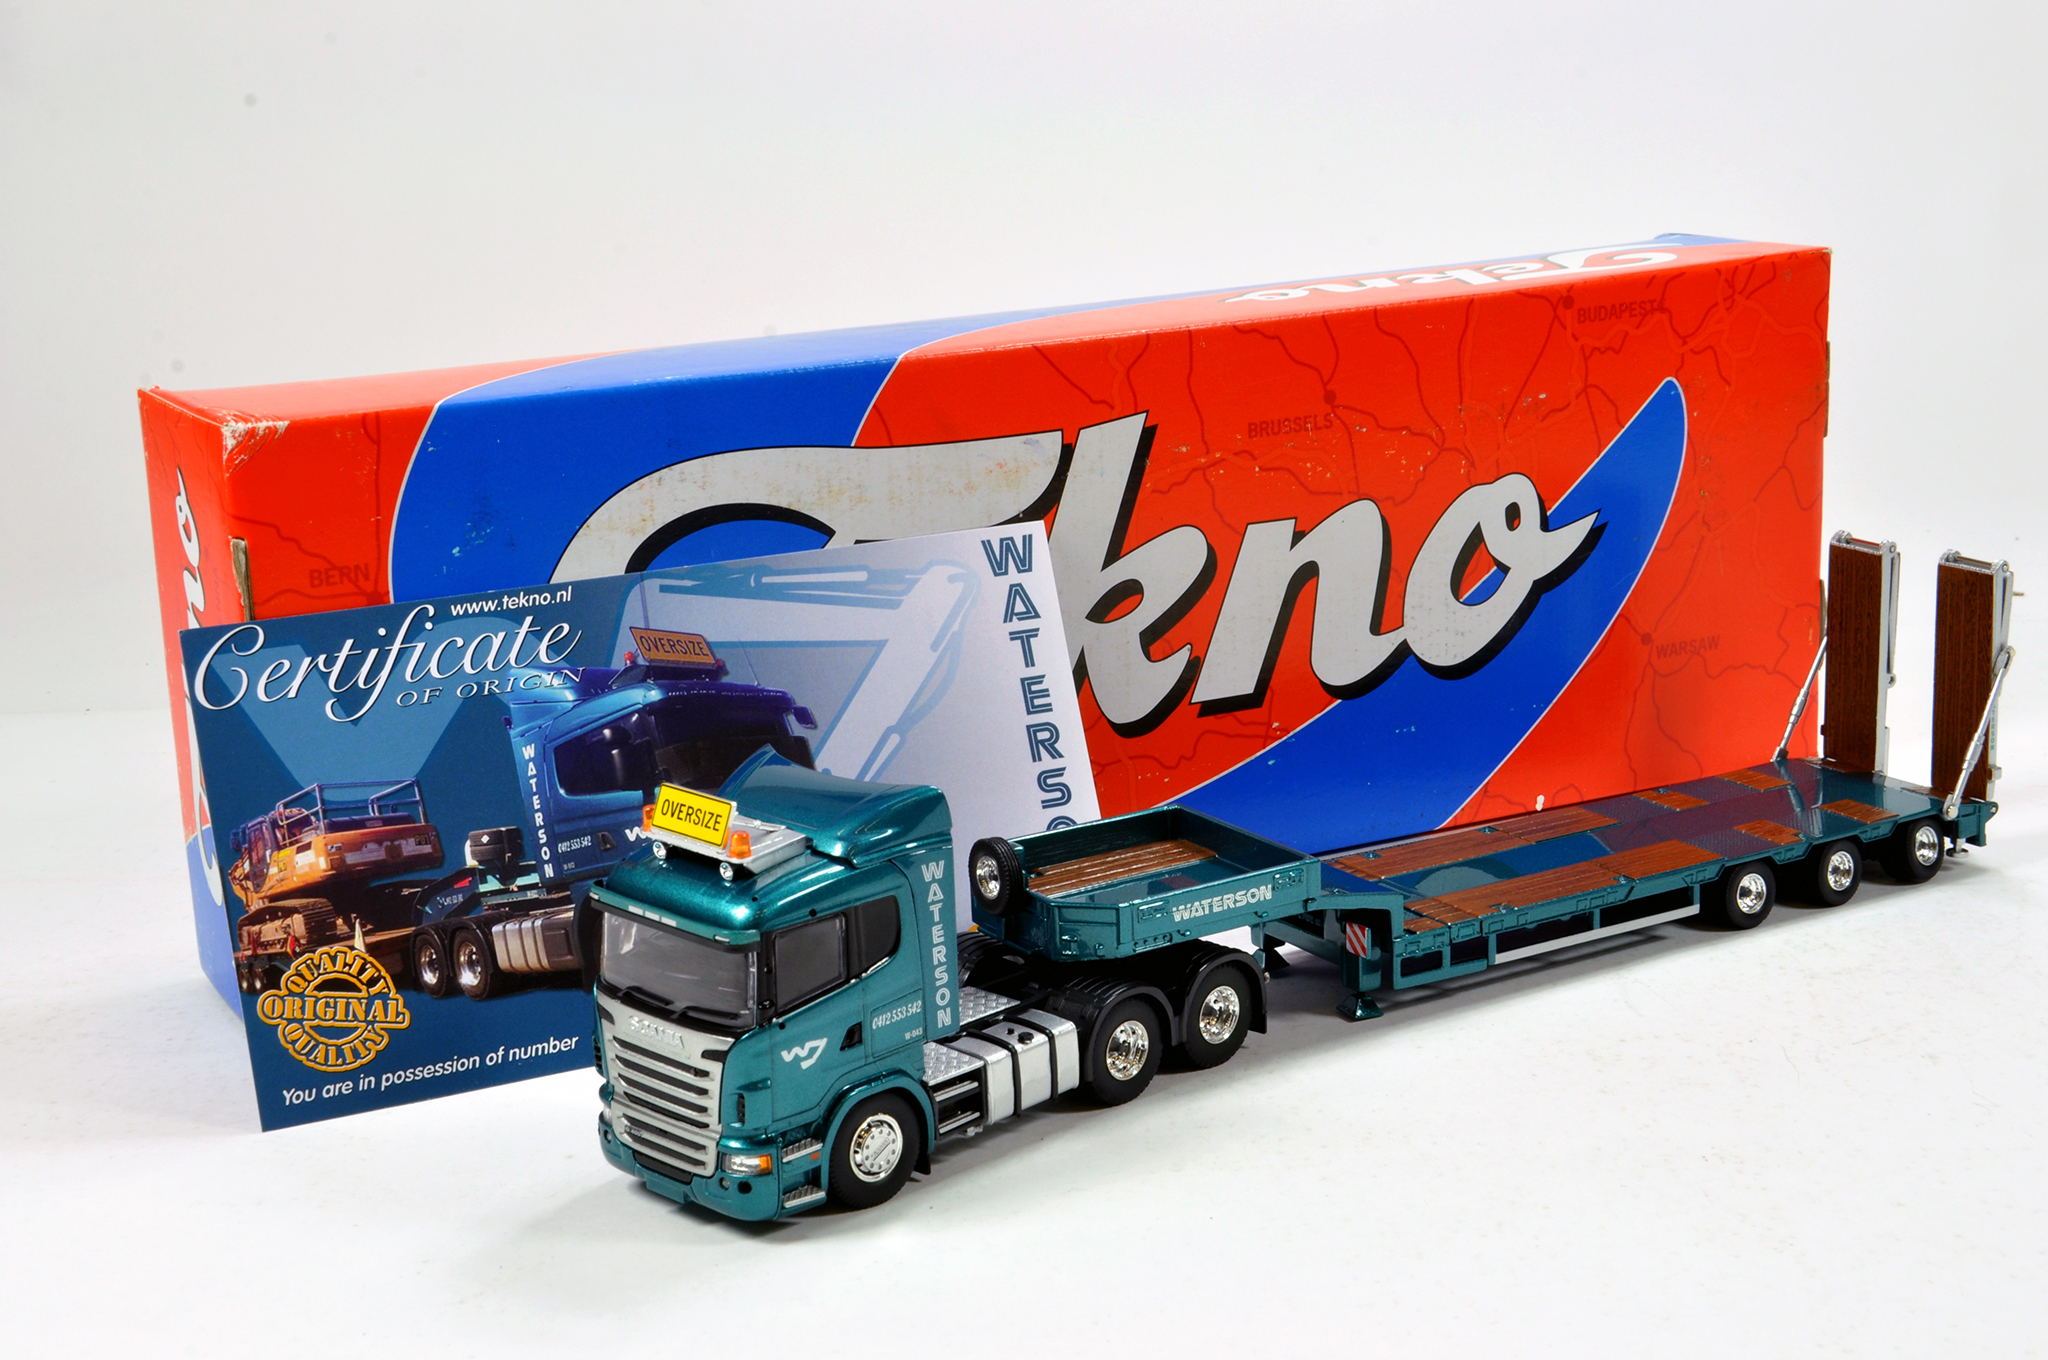 Tekno 1/50 Diecast Precision Truck Issue comprising Scania with Low Loader Trailer in livery of